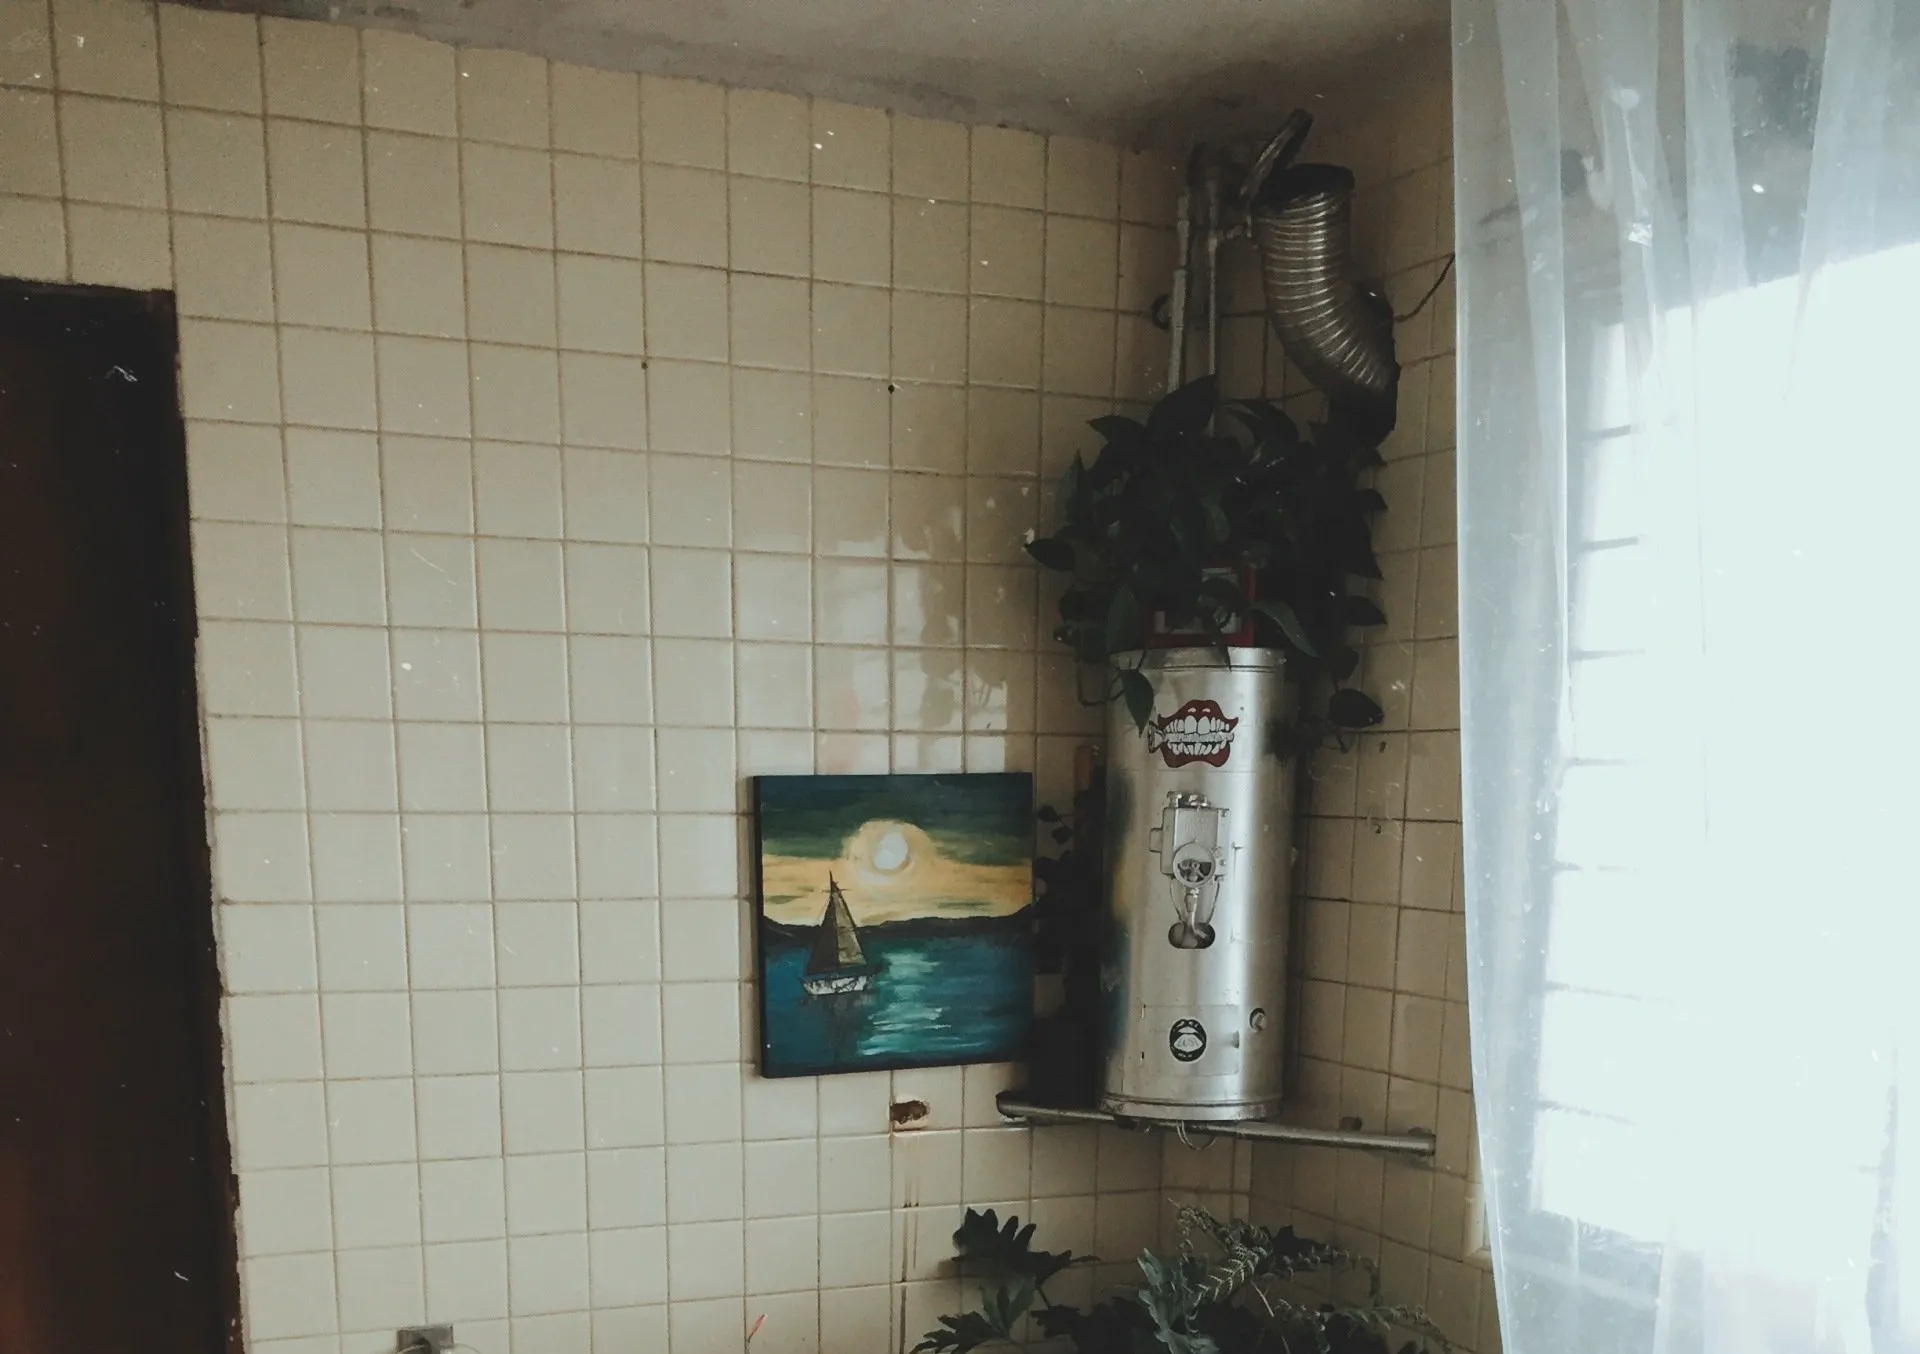 a water heater in the bathroom